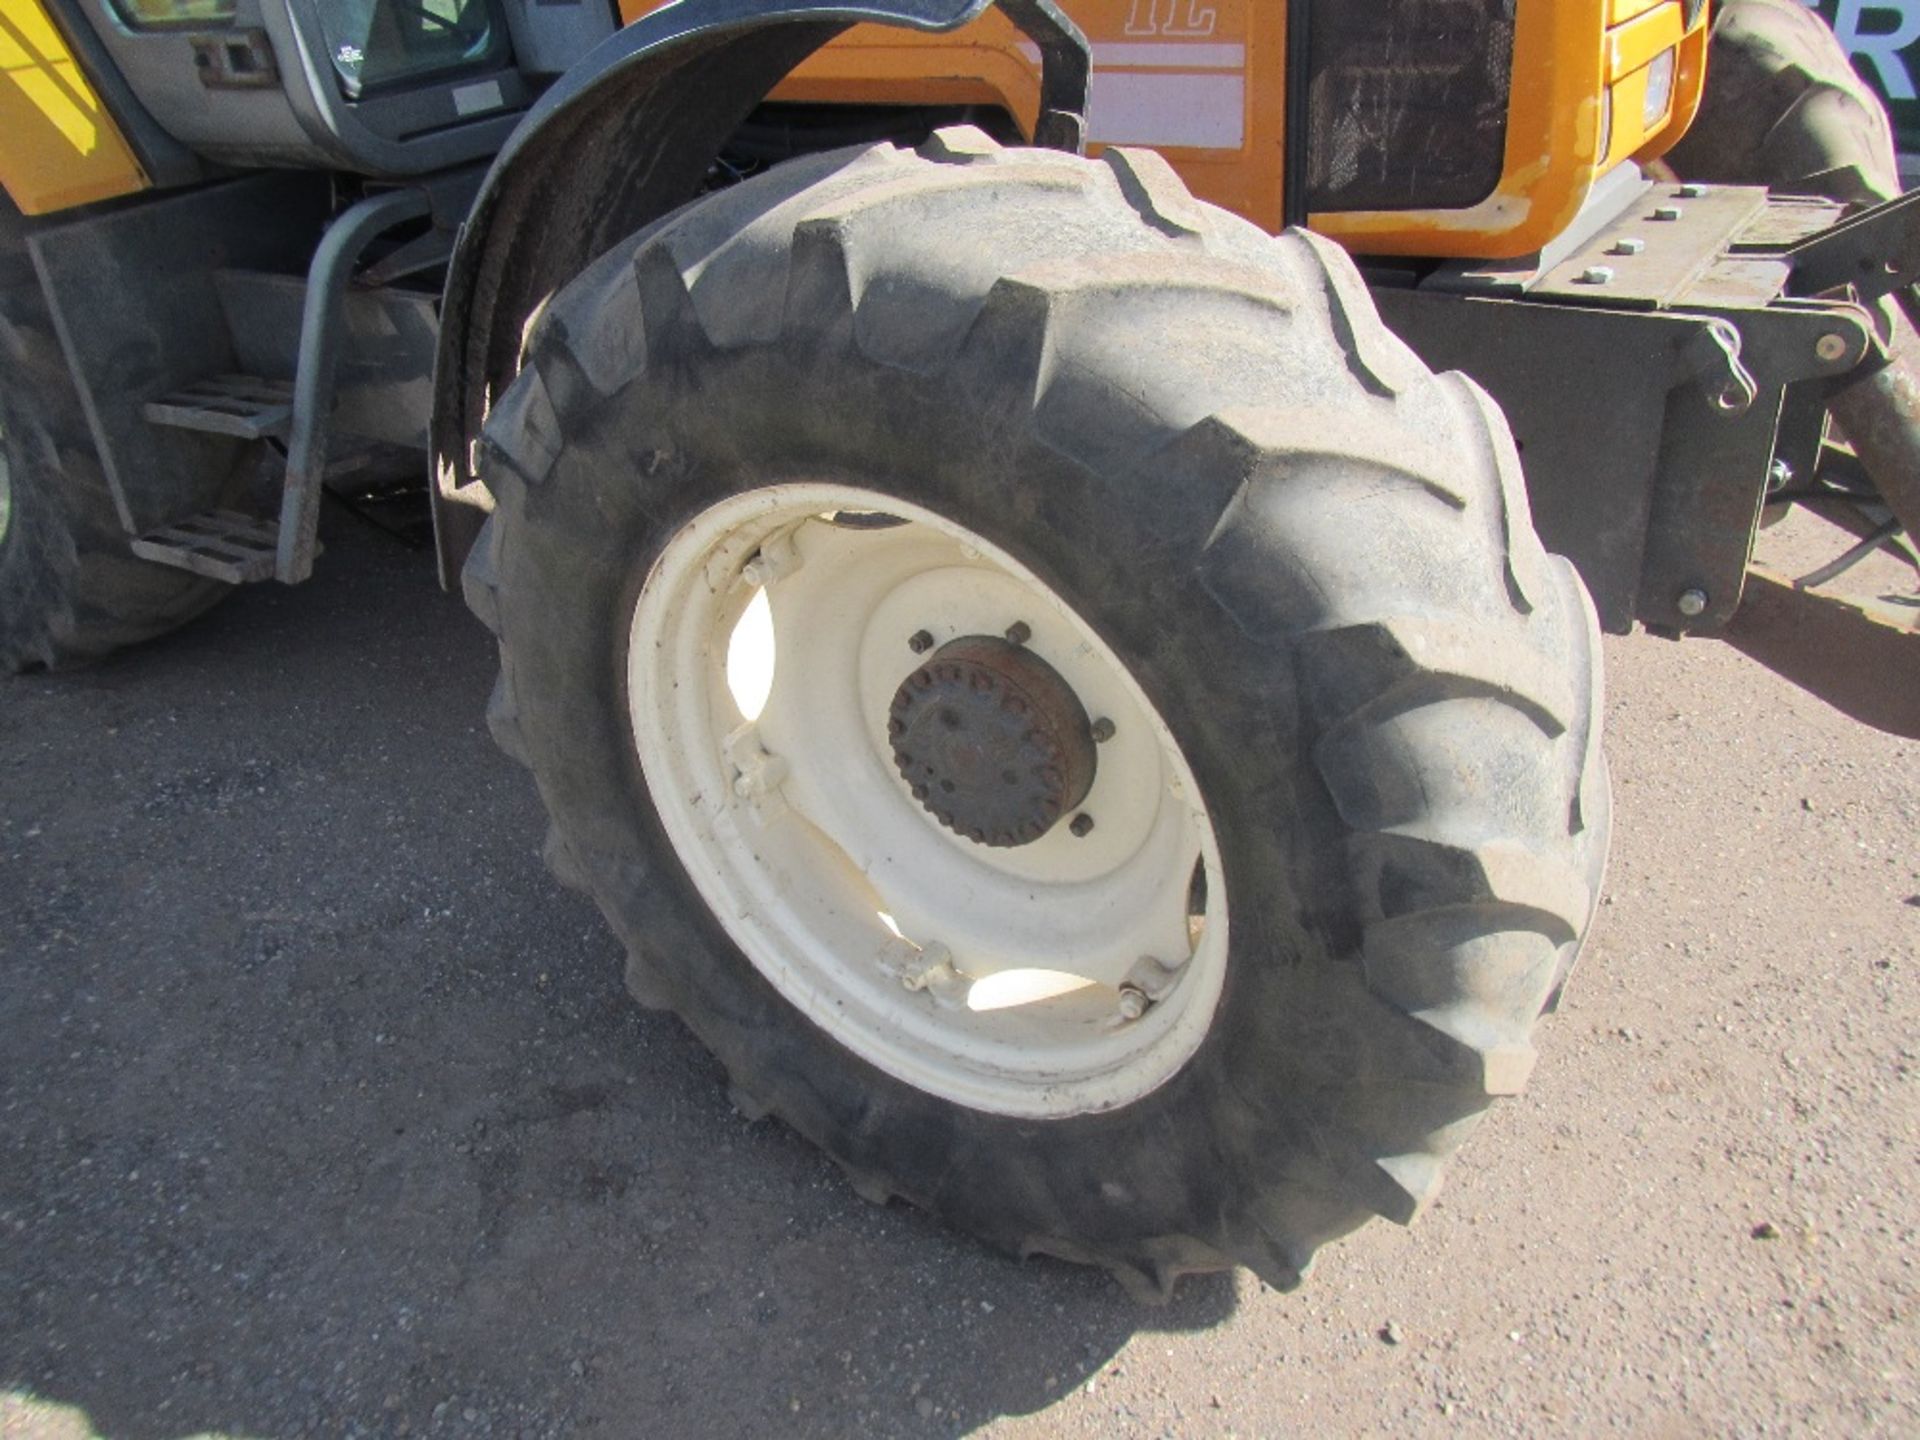 Renault 106-54 TL Tractor c/w front linkage, 40k transmission Reg. No. M895 HSE - Image 5 of 16